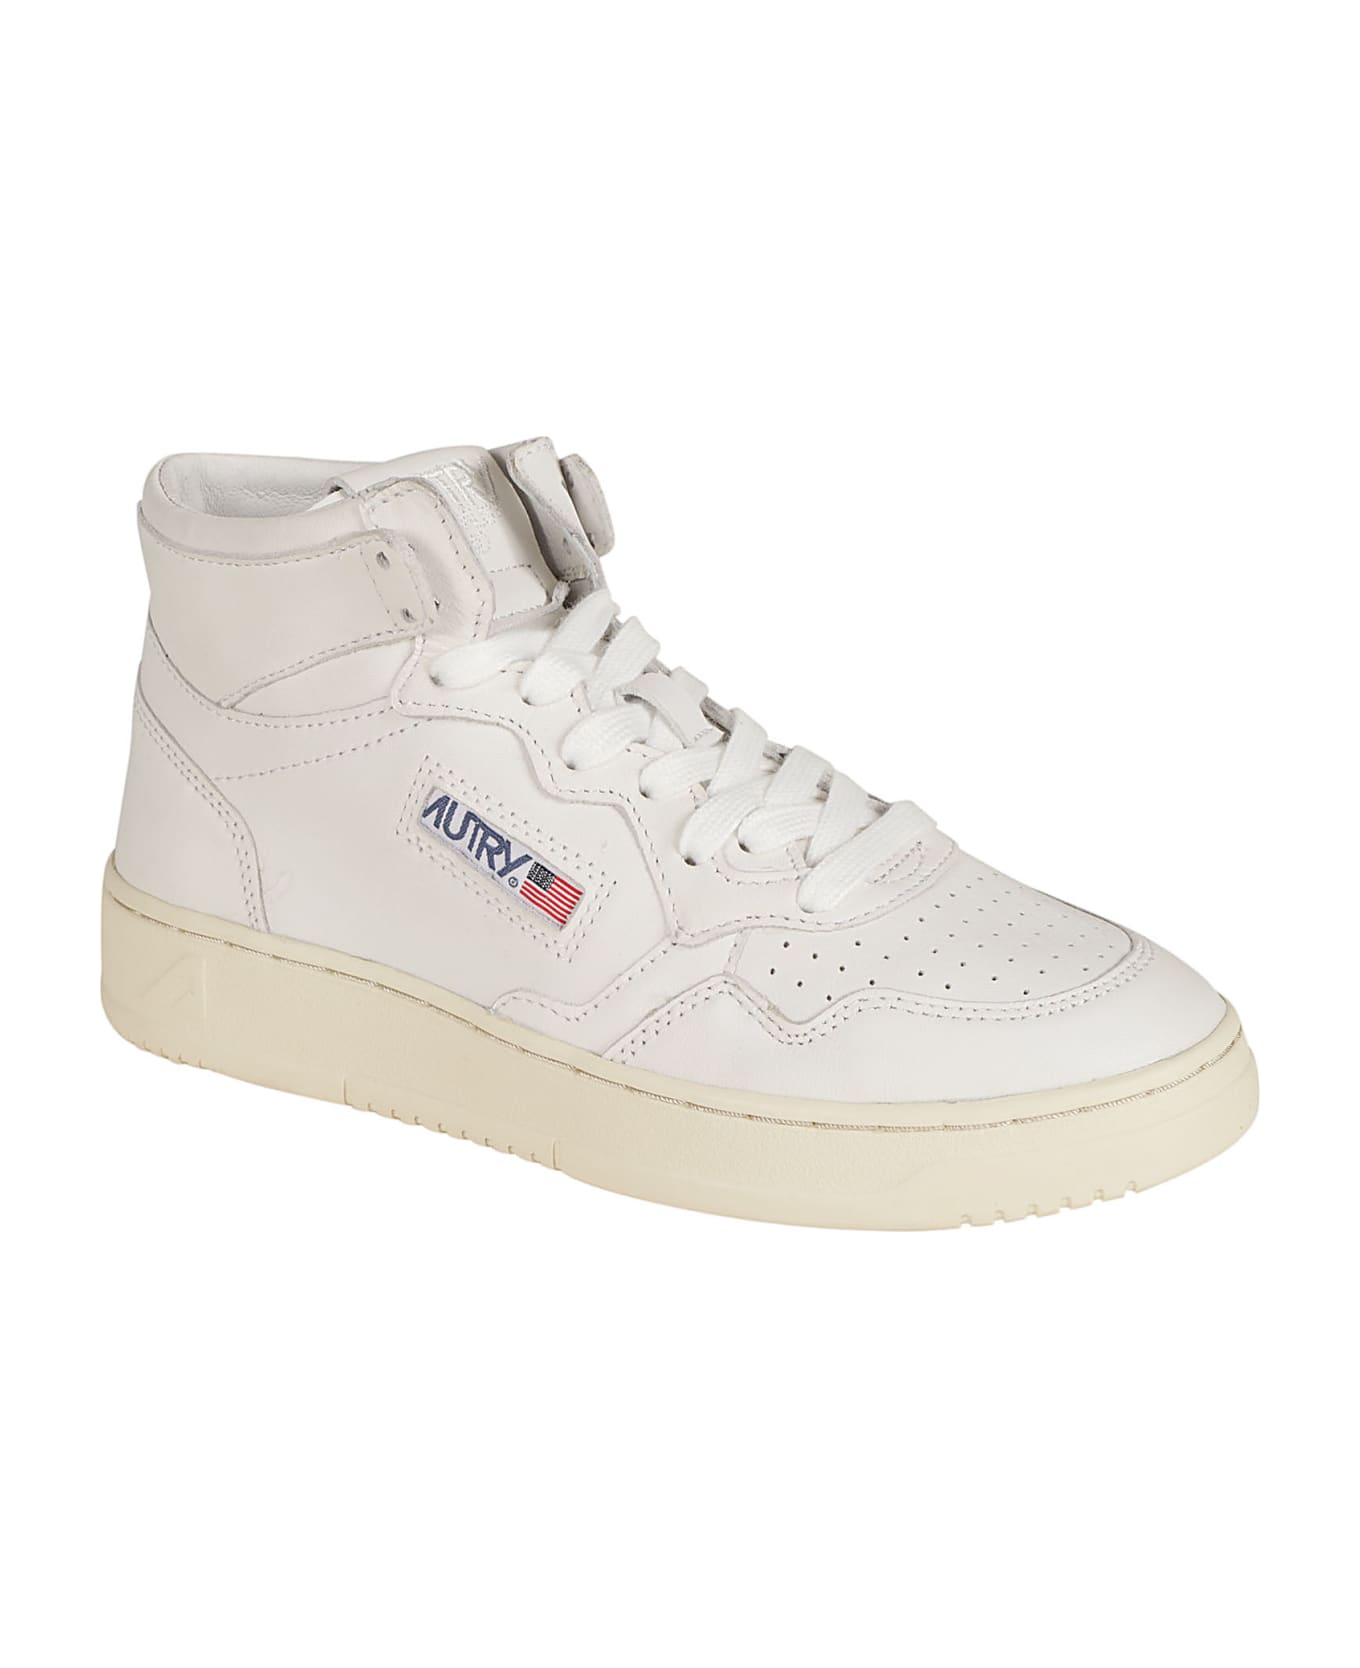 Autry Medalist Mid-top Sneakers - White